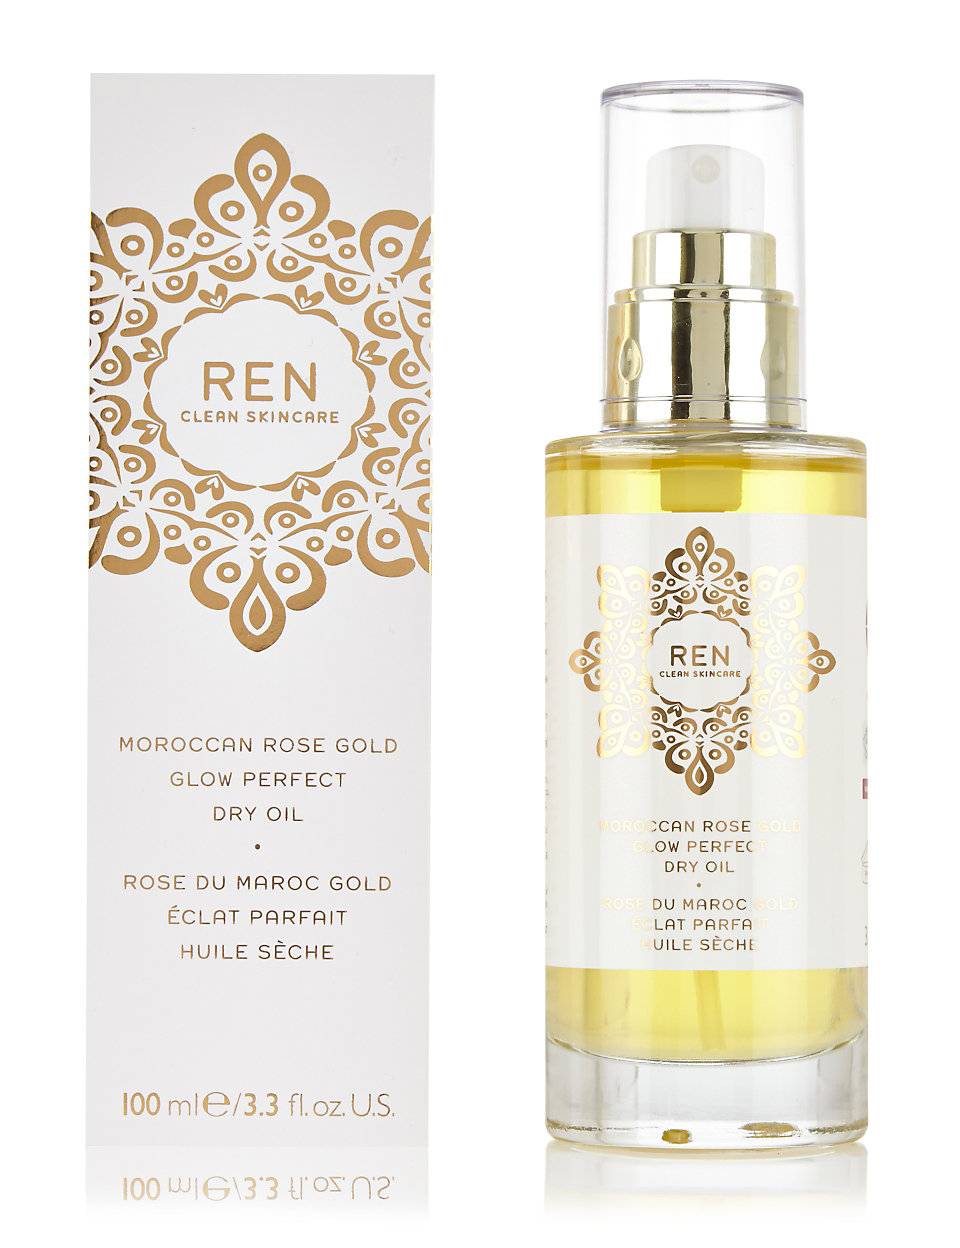 Moroccan Rose Gold Glow Perfect Dry Oil 100ml